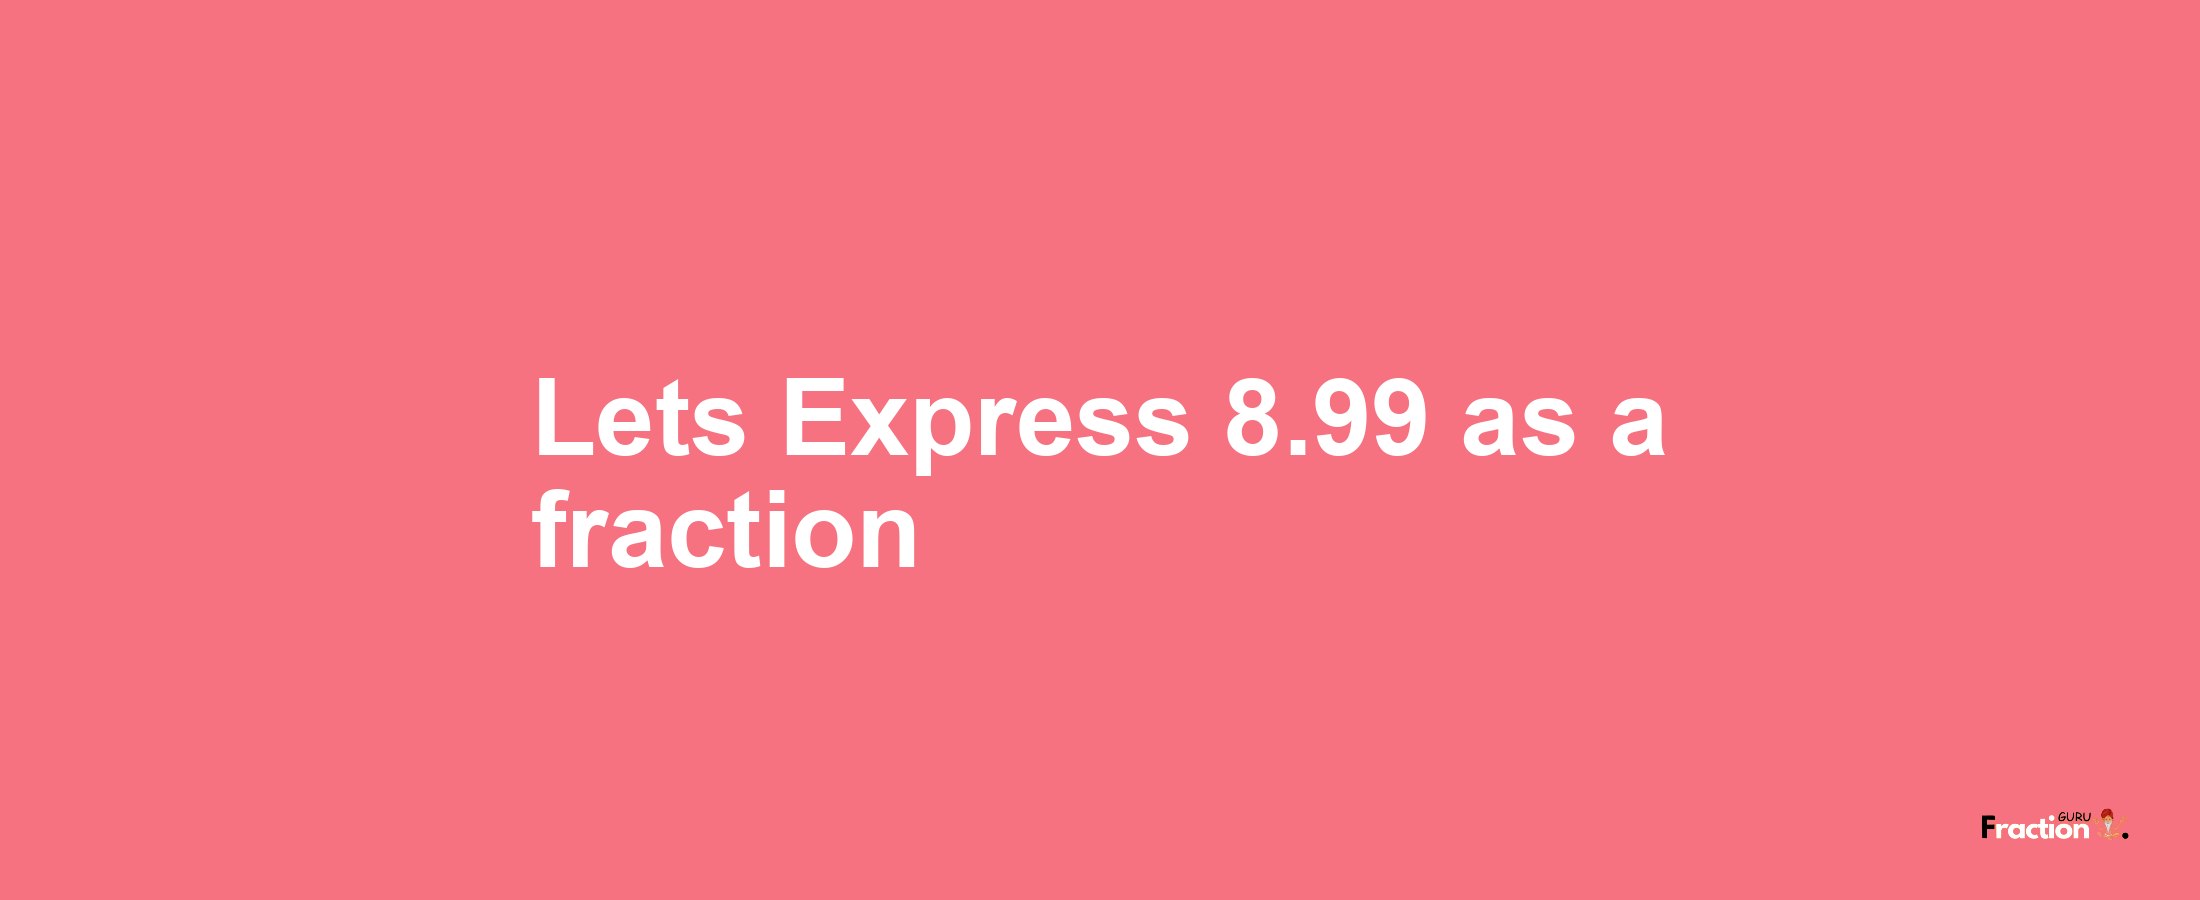 Lets Express 8.99 as afraction